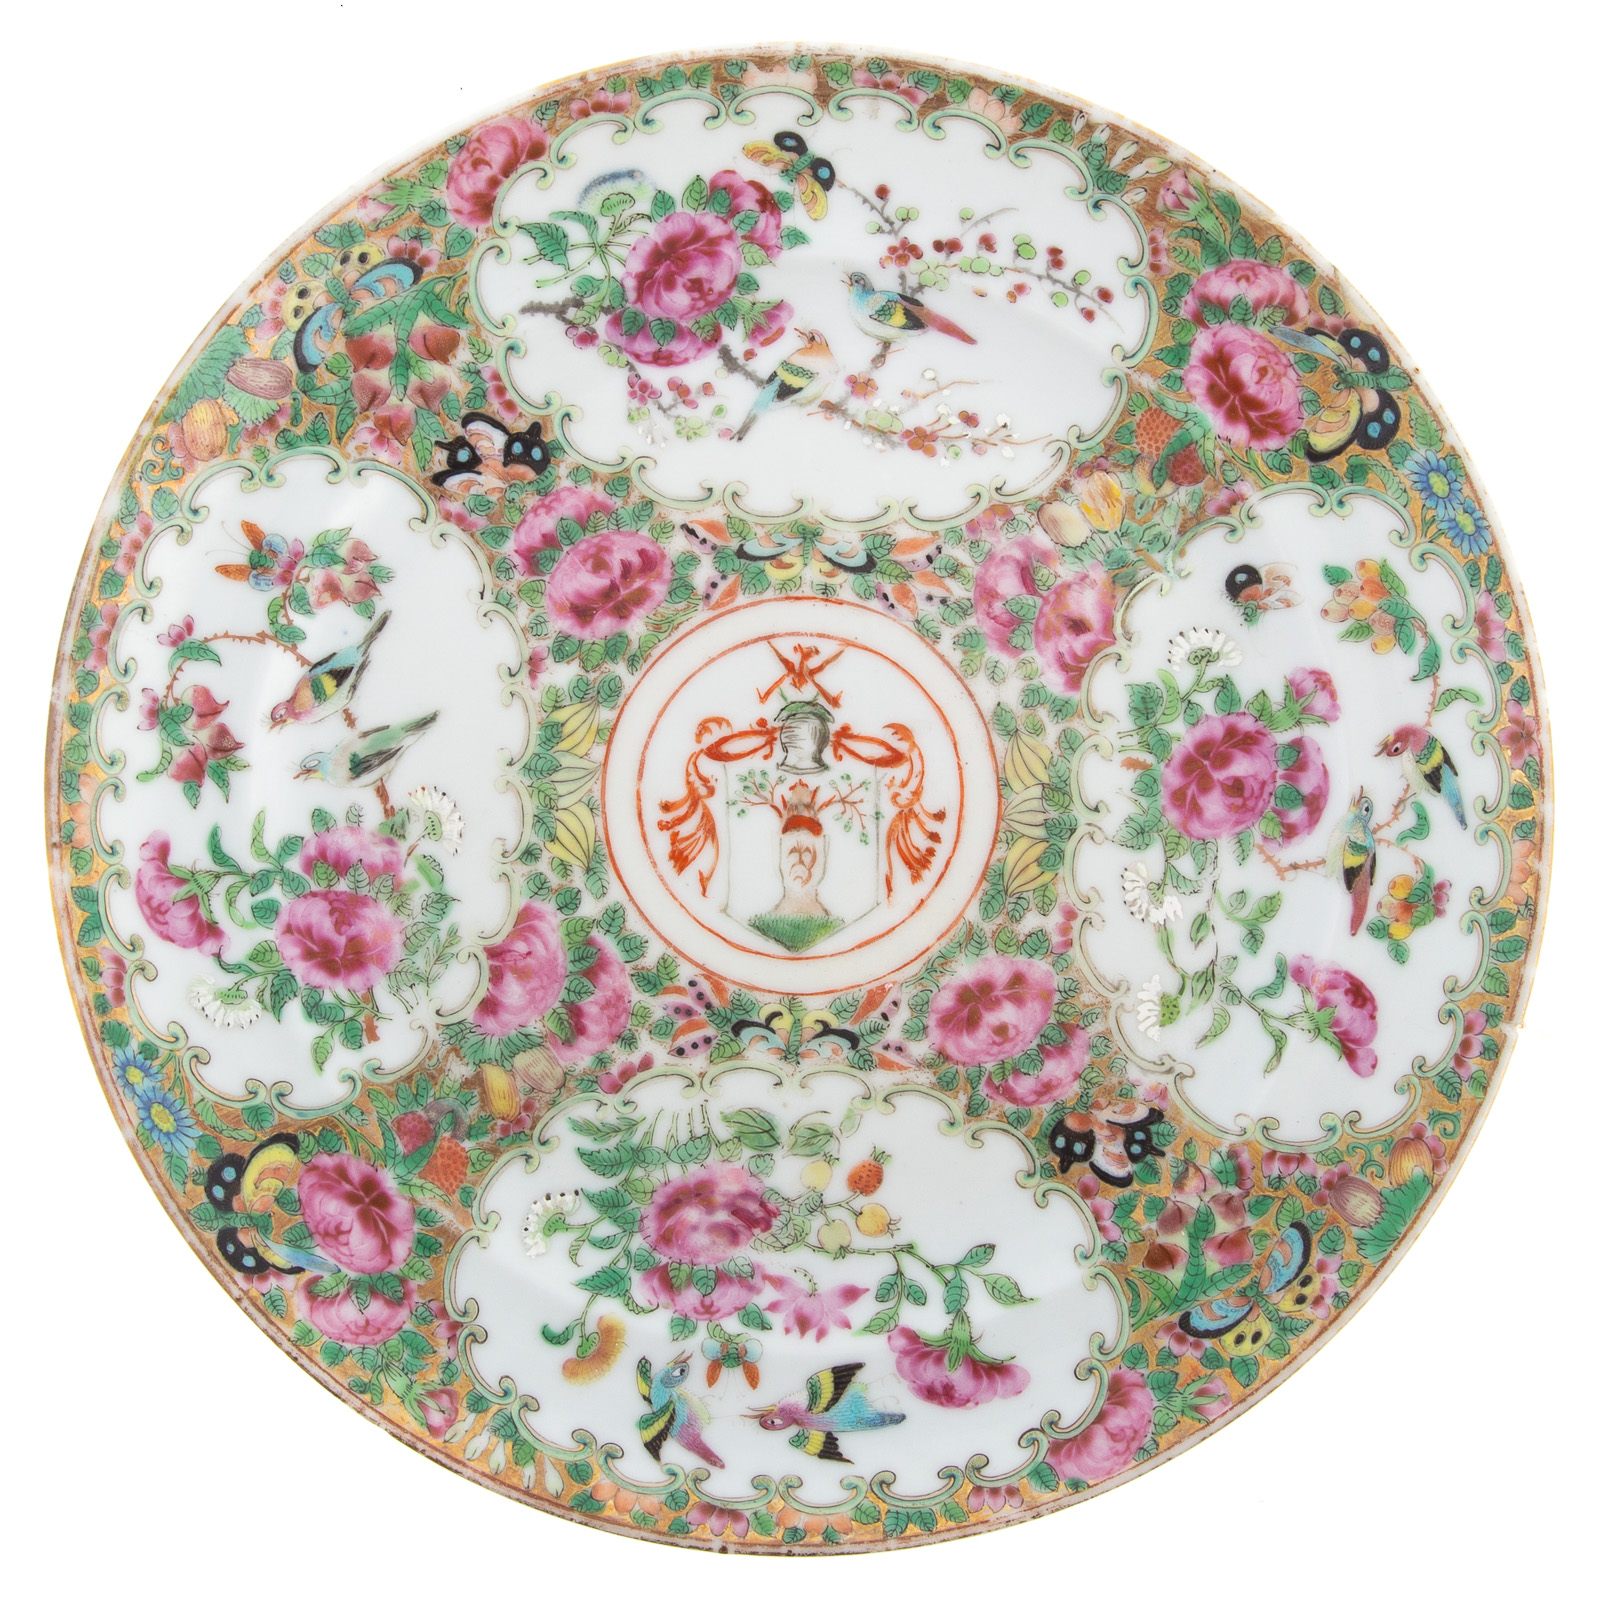 CHINESE EXPORT ROSE CANTON ARMORIAL